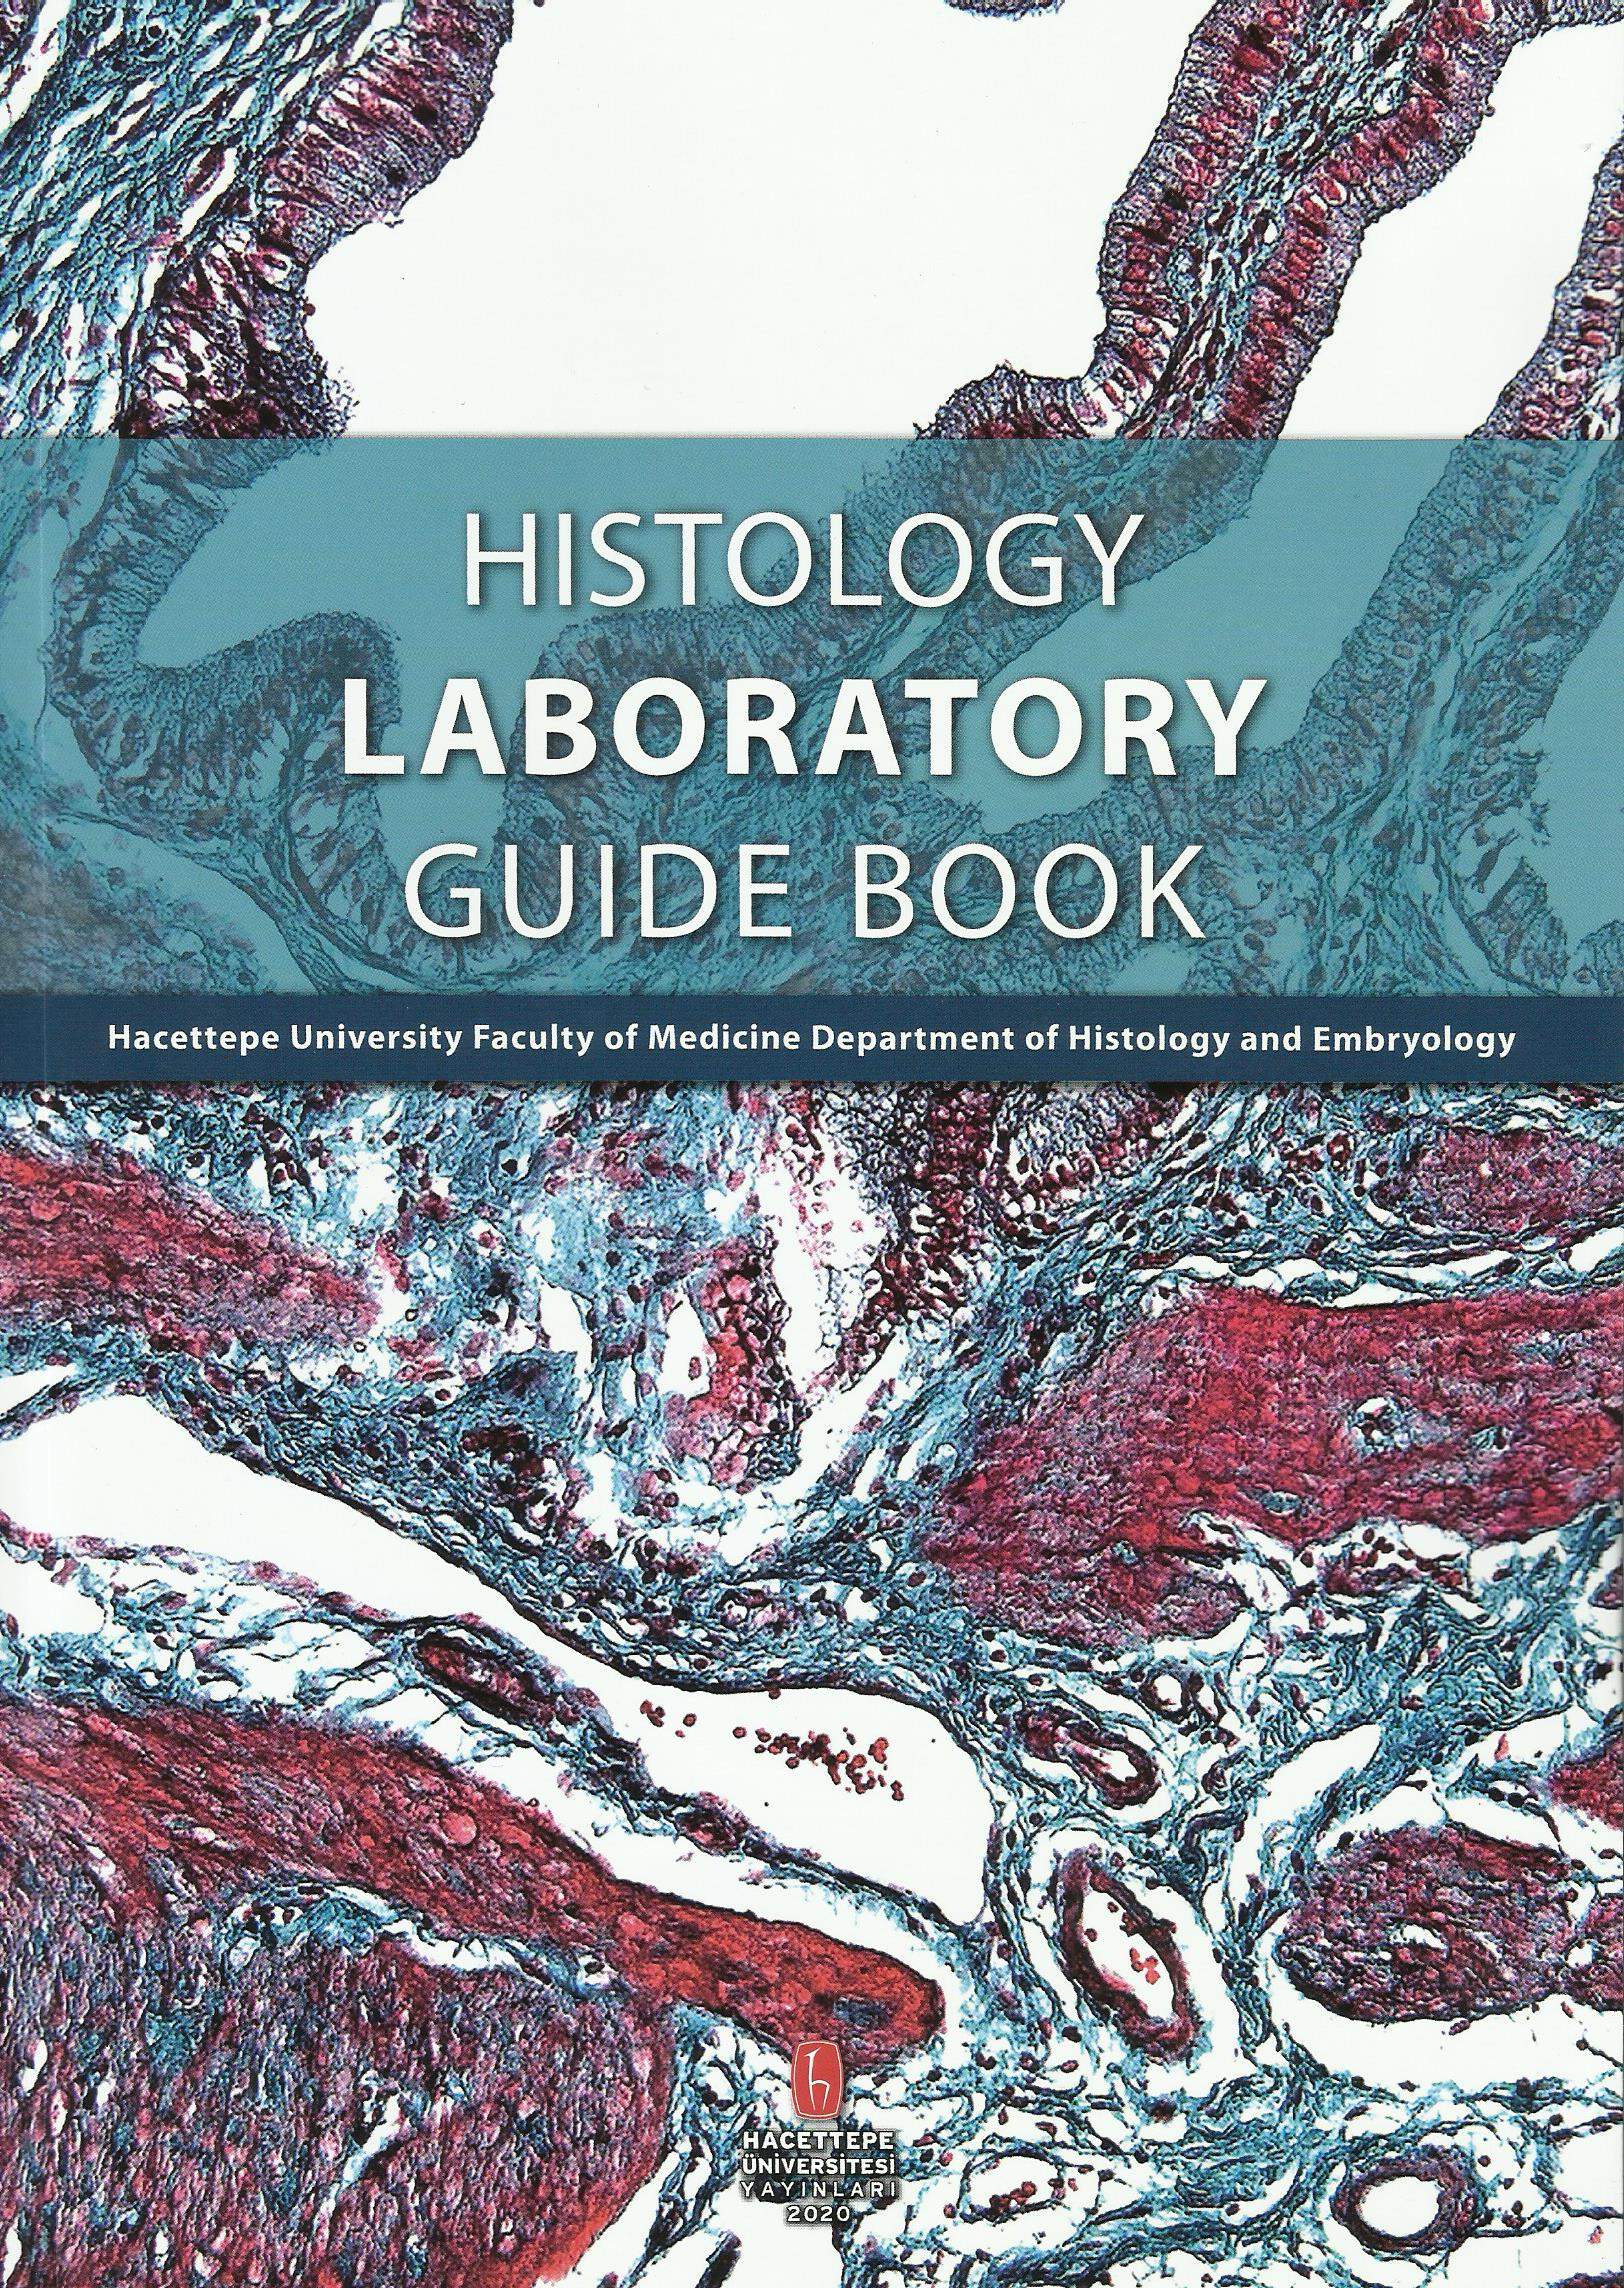 HISTOLOGY LABORATORY GUIDE BOOK